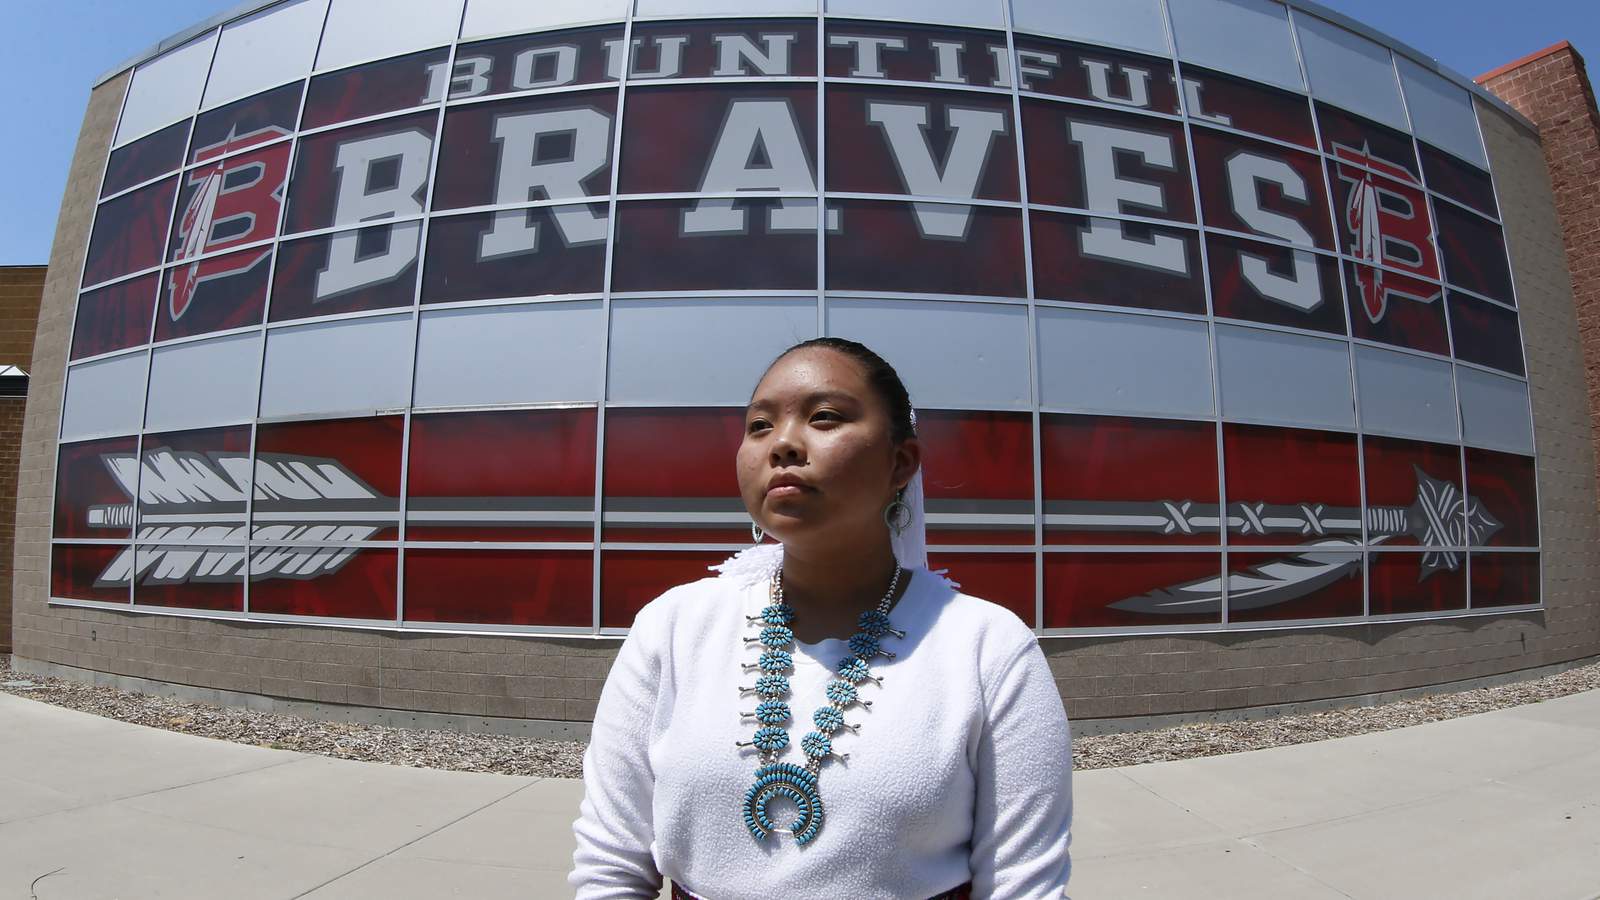 Native mascots still a sticking point in high school sports